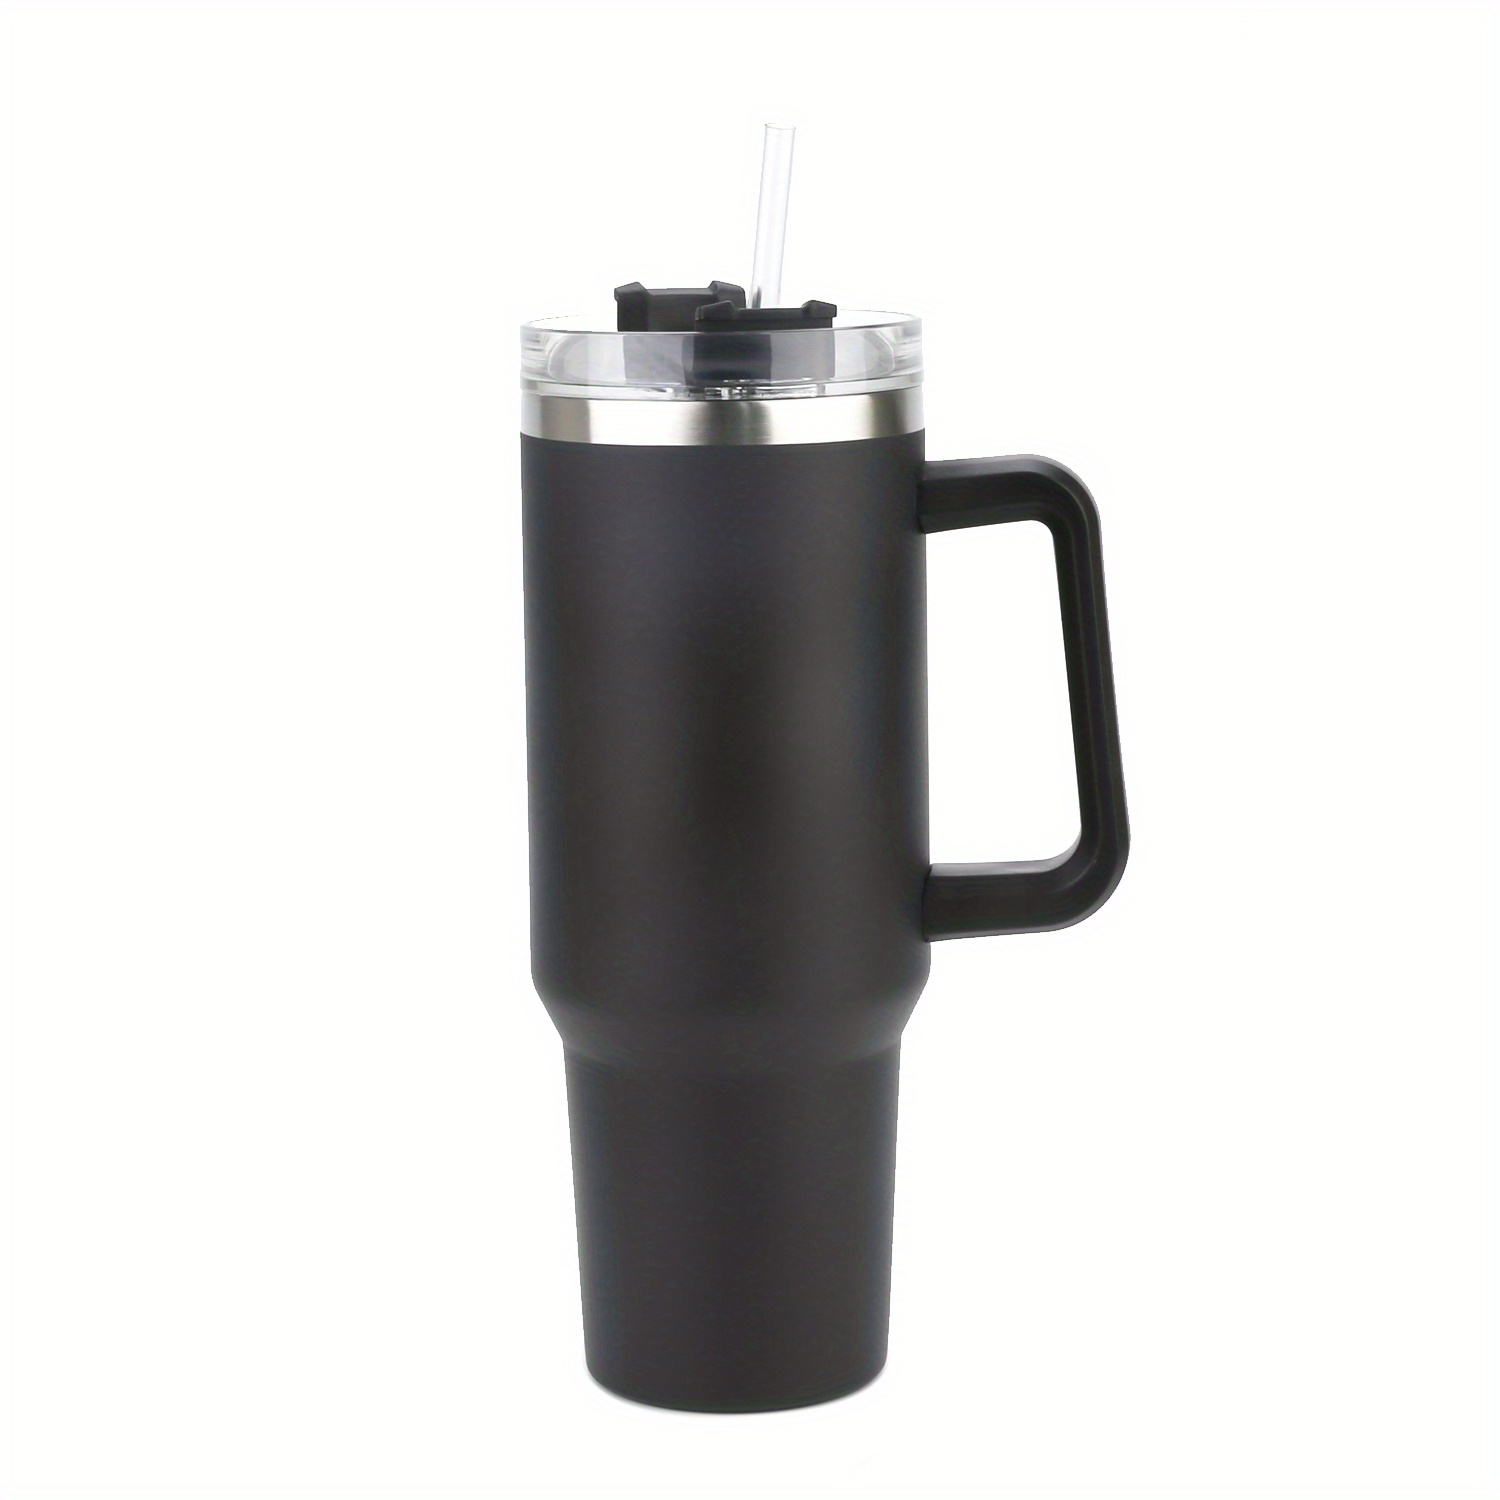 20 oz Tumbler Mug with Lid and Straw, Insulated Travel Coffee Mug with  Handle, Double Wall Stainless Steel Vacuum Coffee Tumbler, Thermal Coffee  Cup, Black 